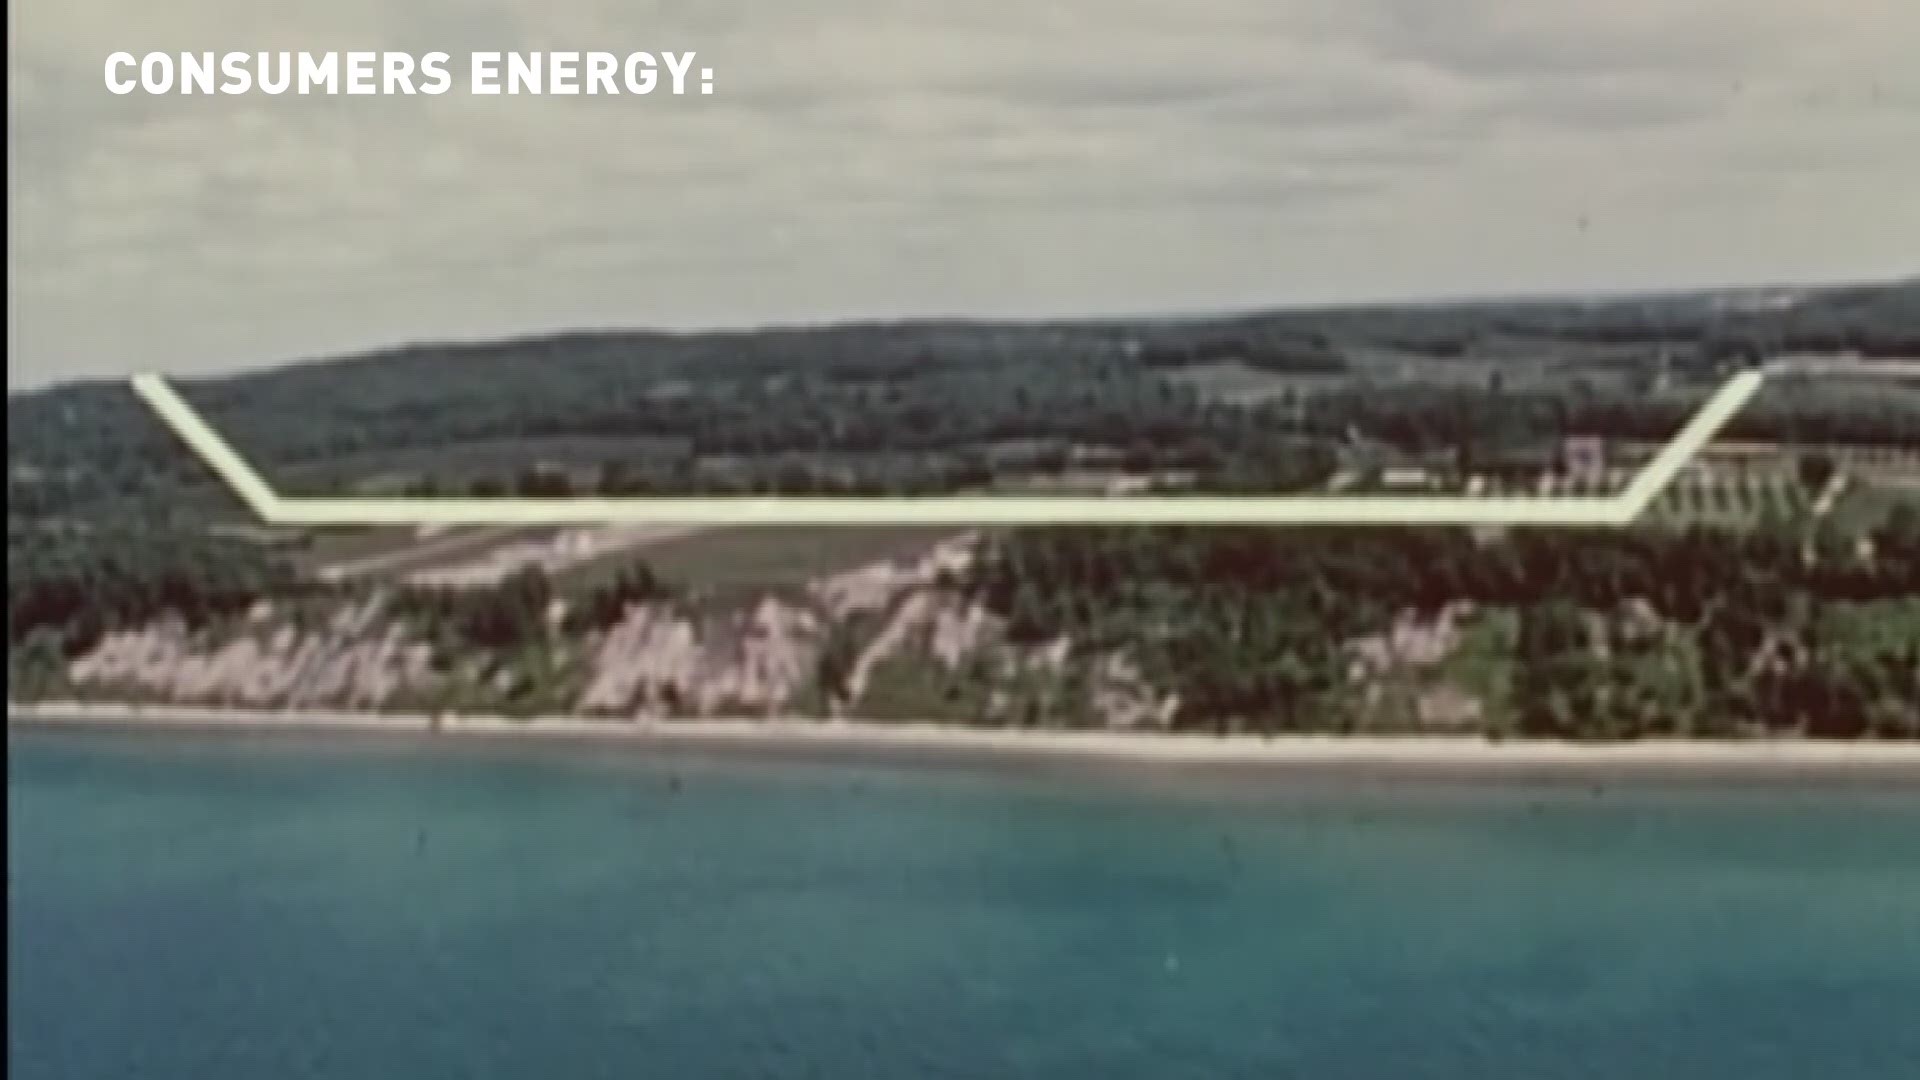 The pumped storage plant in Ludington uses simple technology that allows it to respond quickly to Michigan's energy demand.